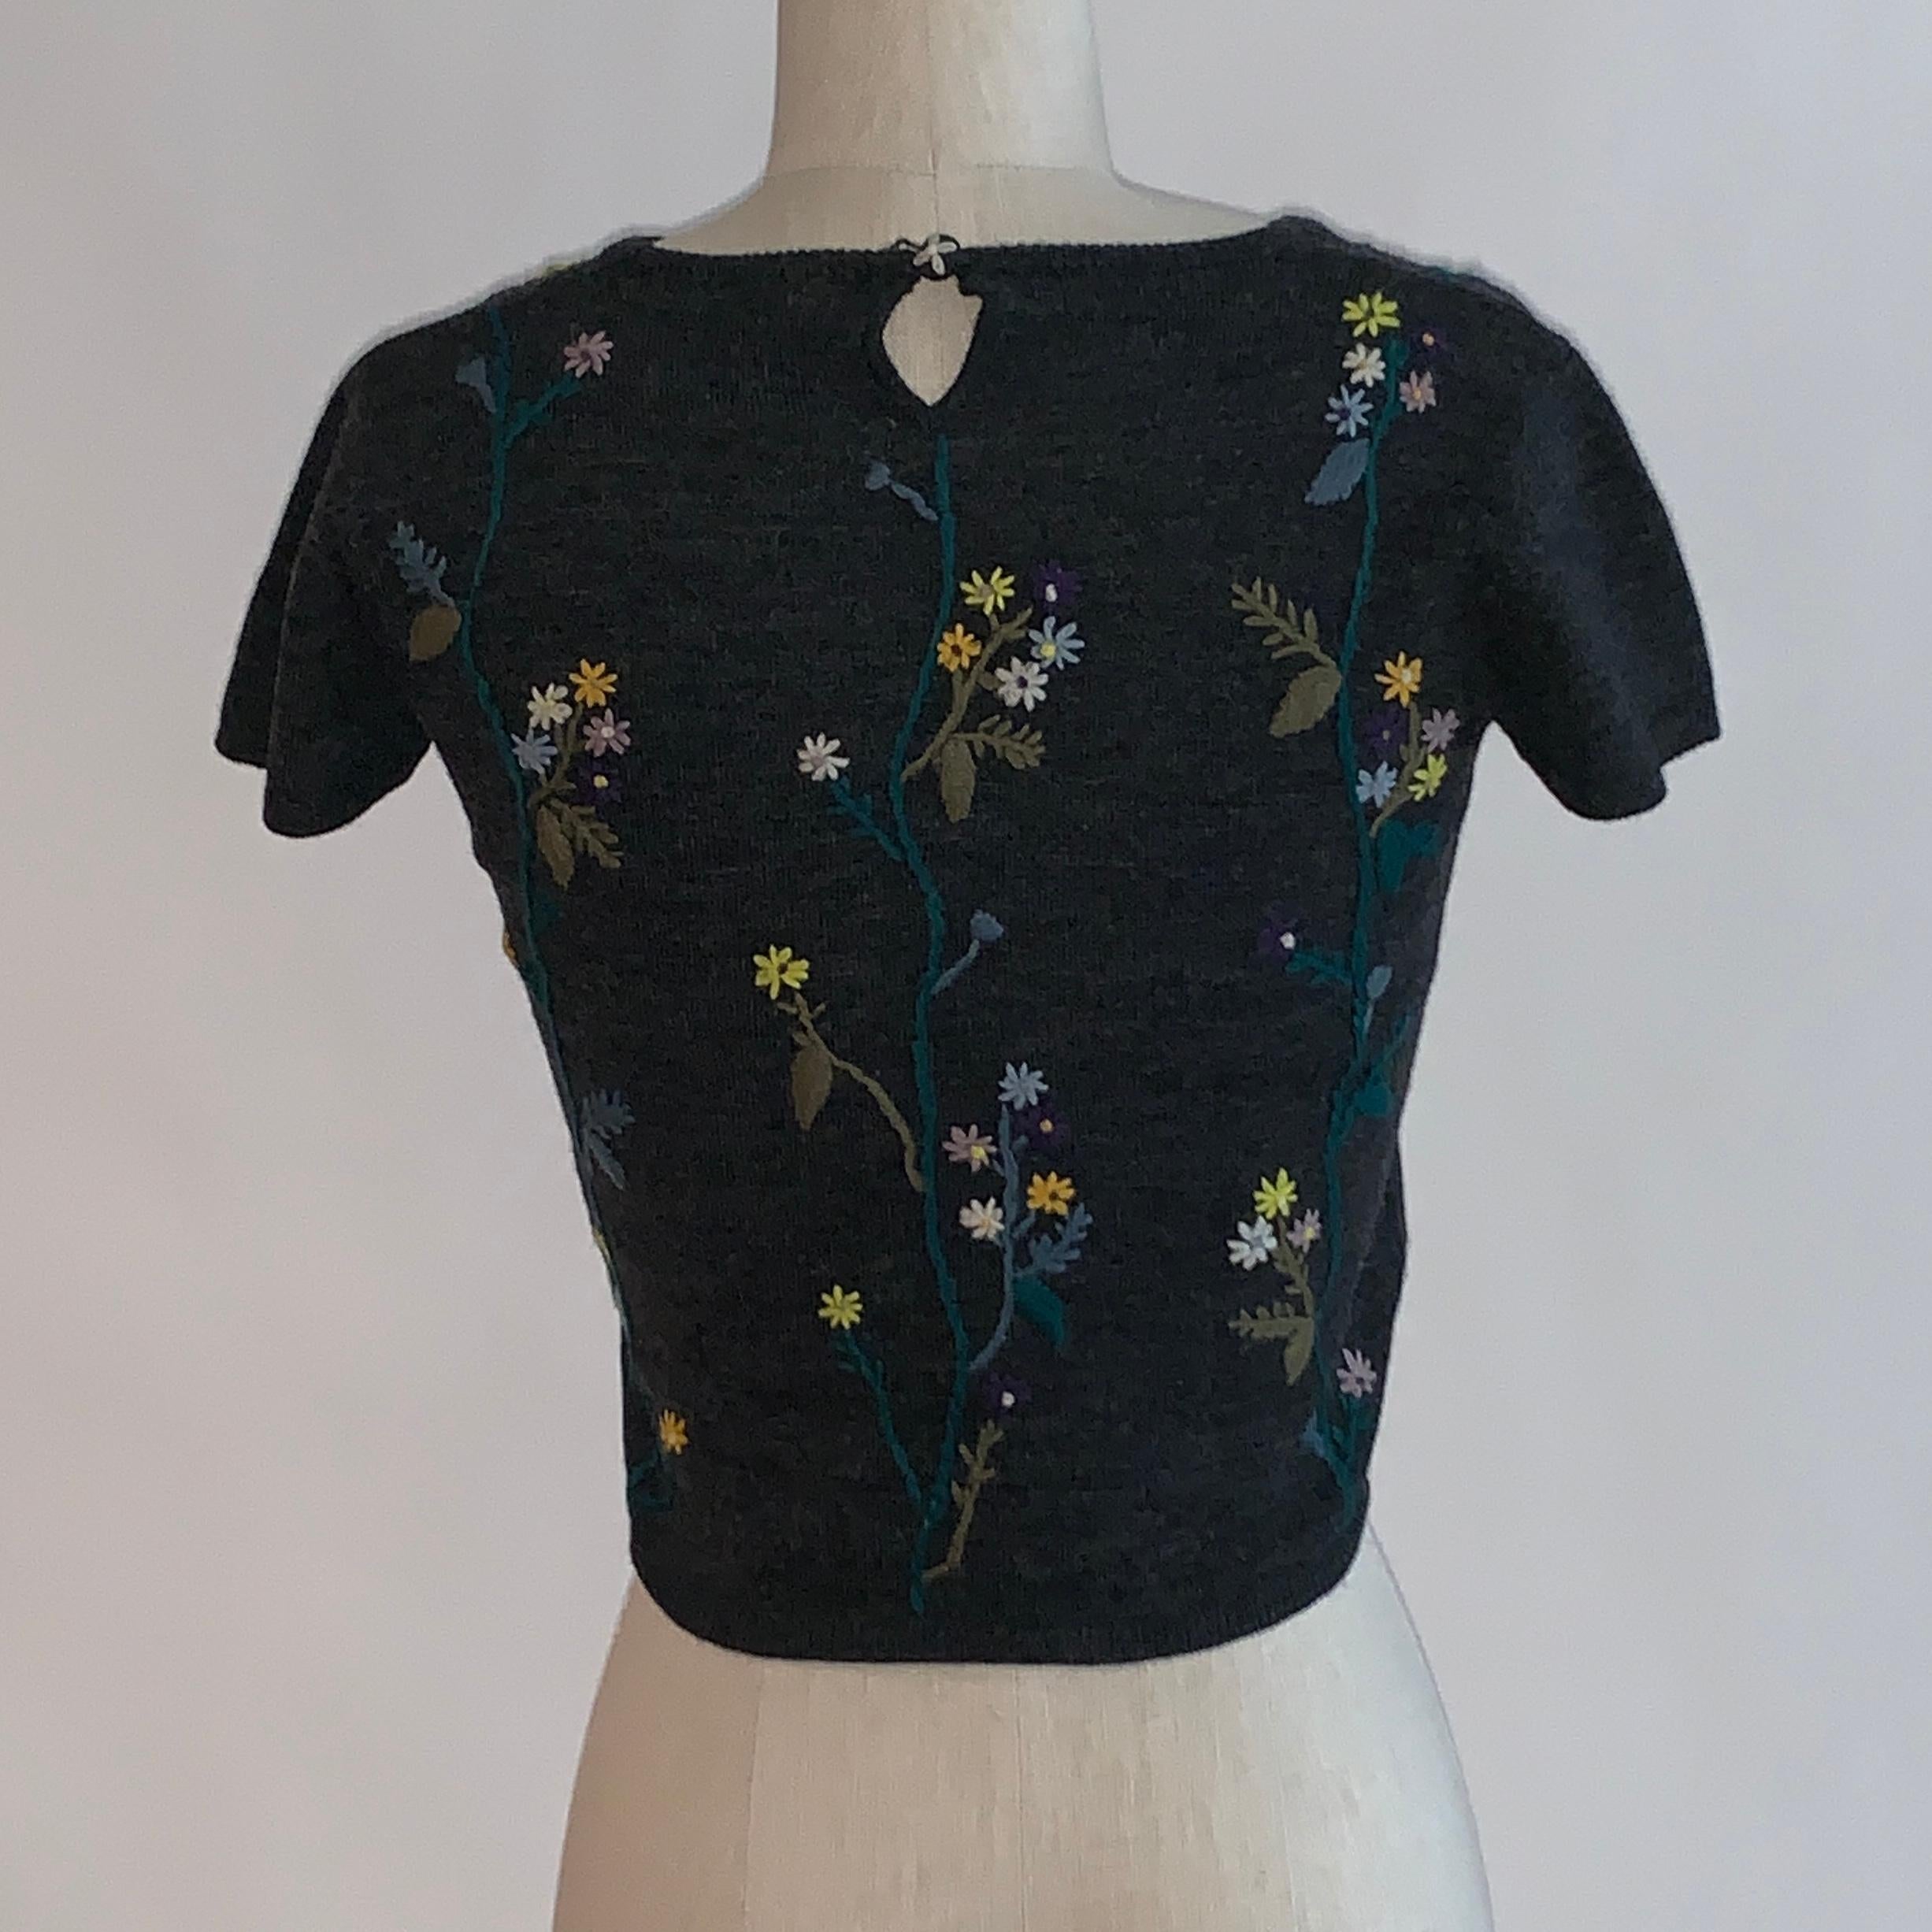 Black Moschino Cheap & Chic 1990s Grey Floral Cropped Sweater Top